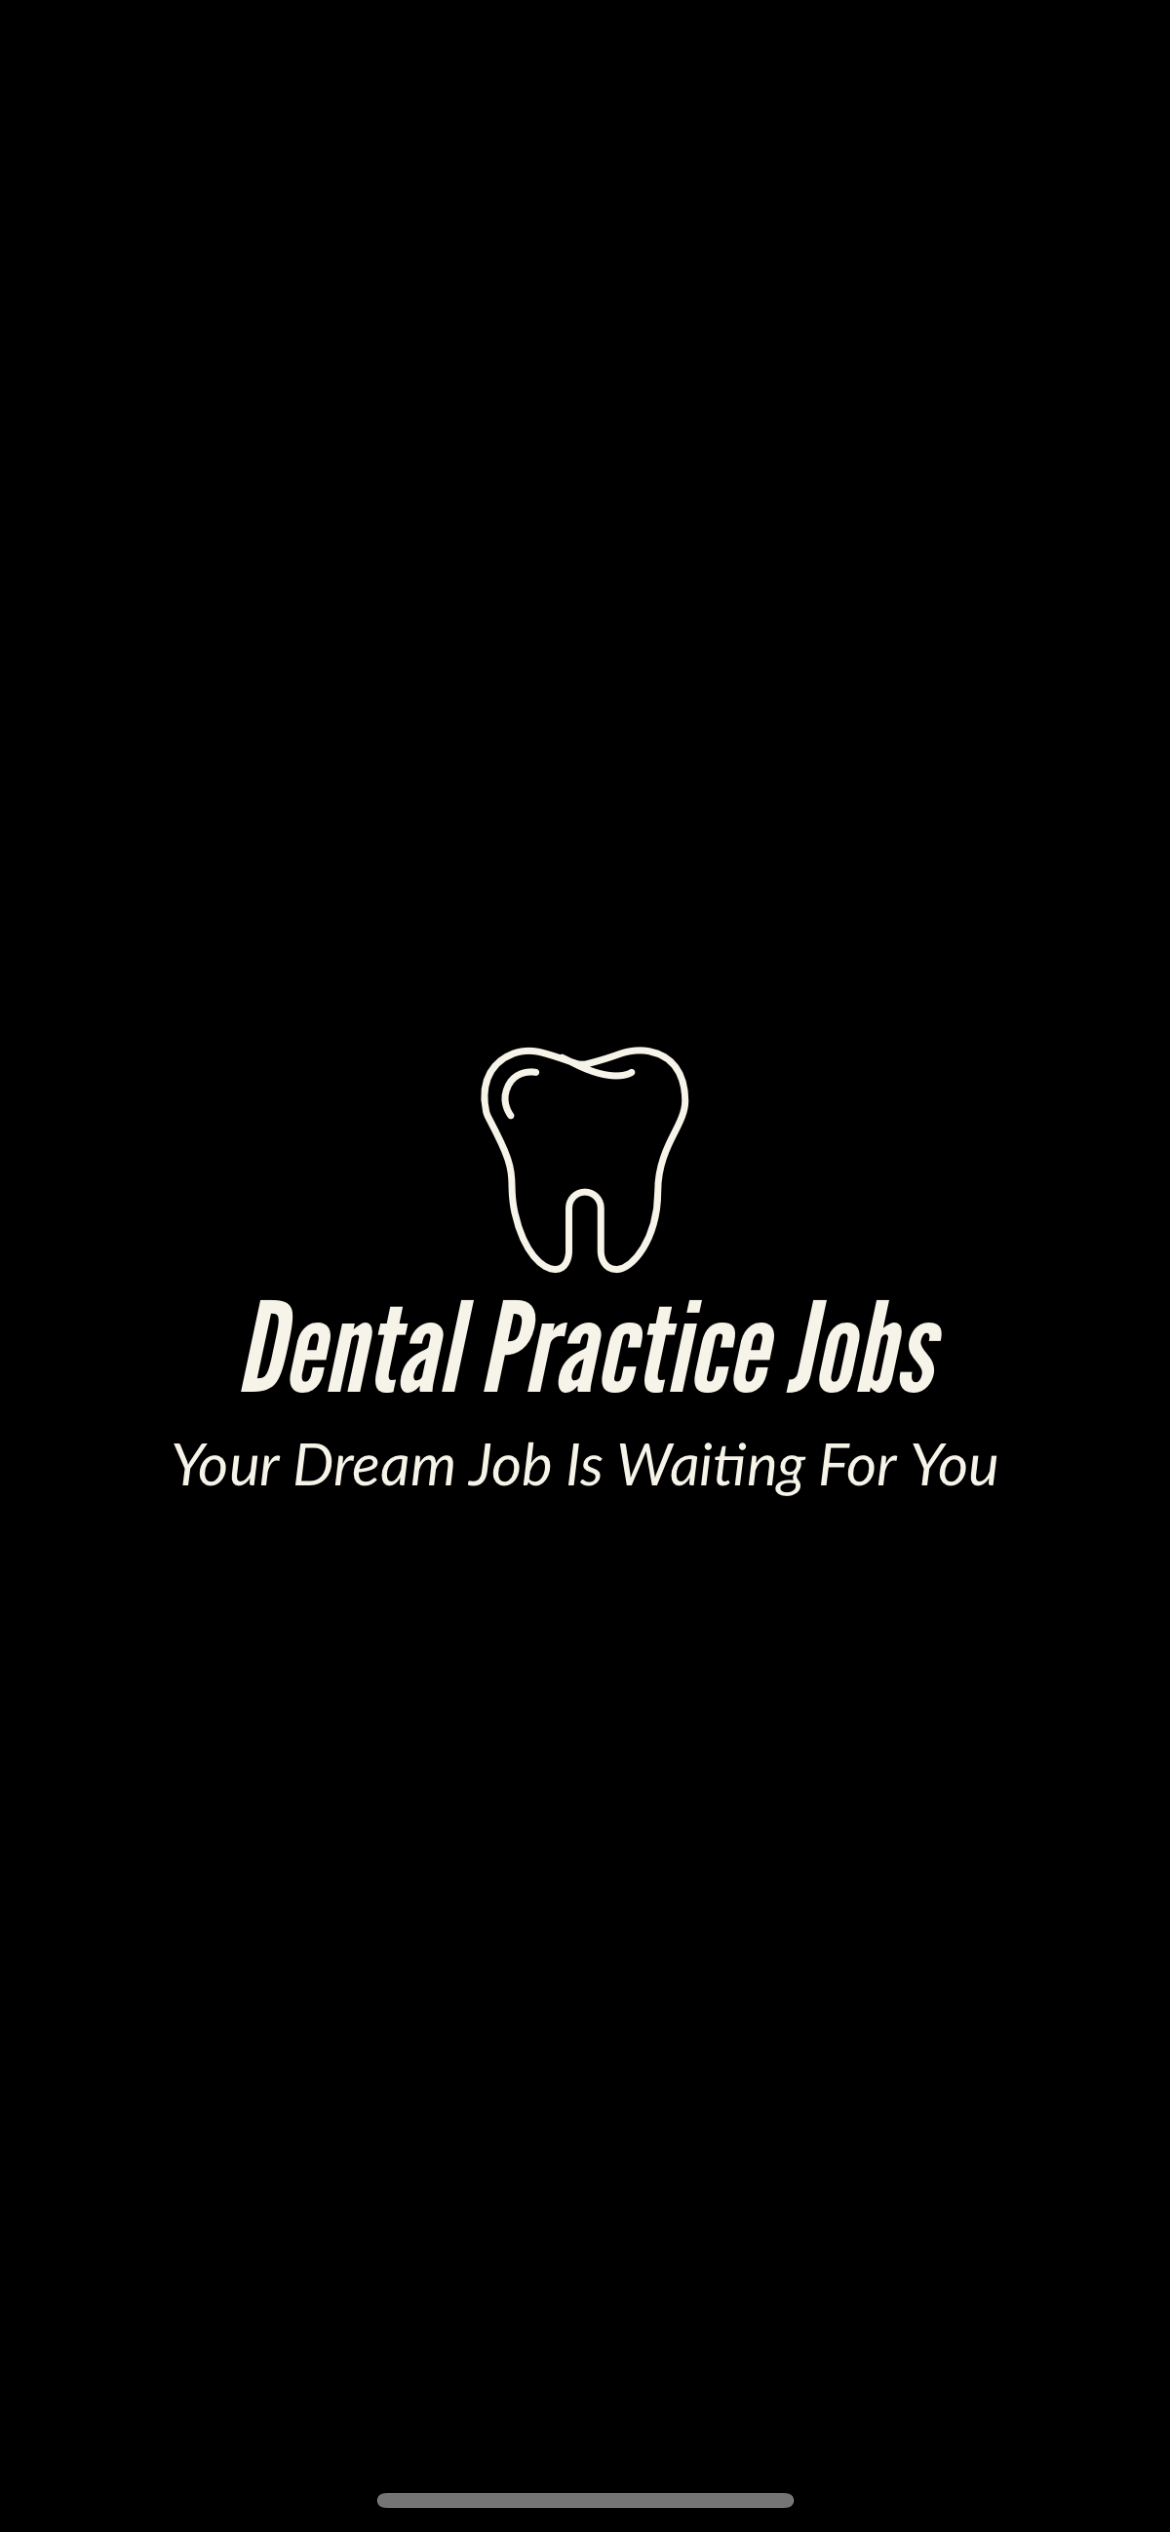 Logo of Dental Practice Jobs Employment And Recruitment Agencies In Essex